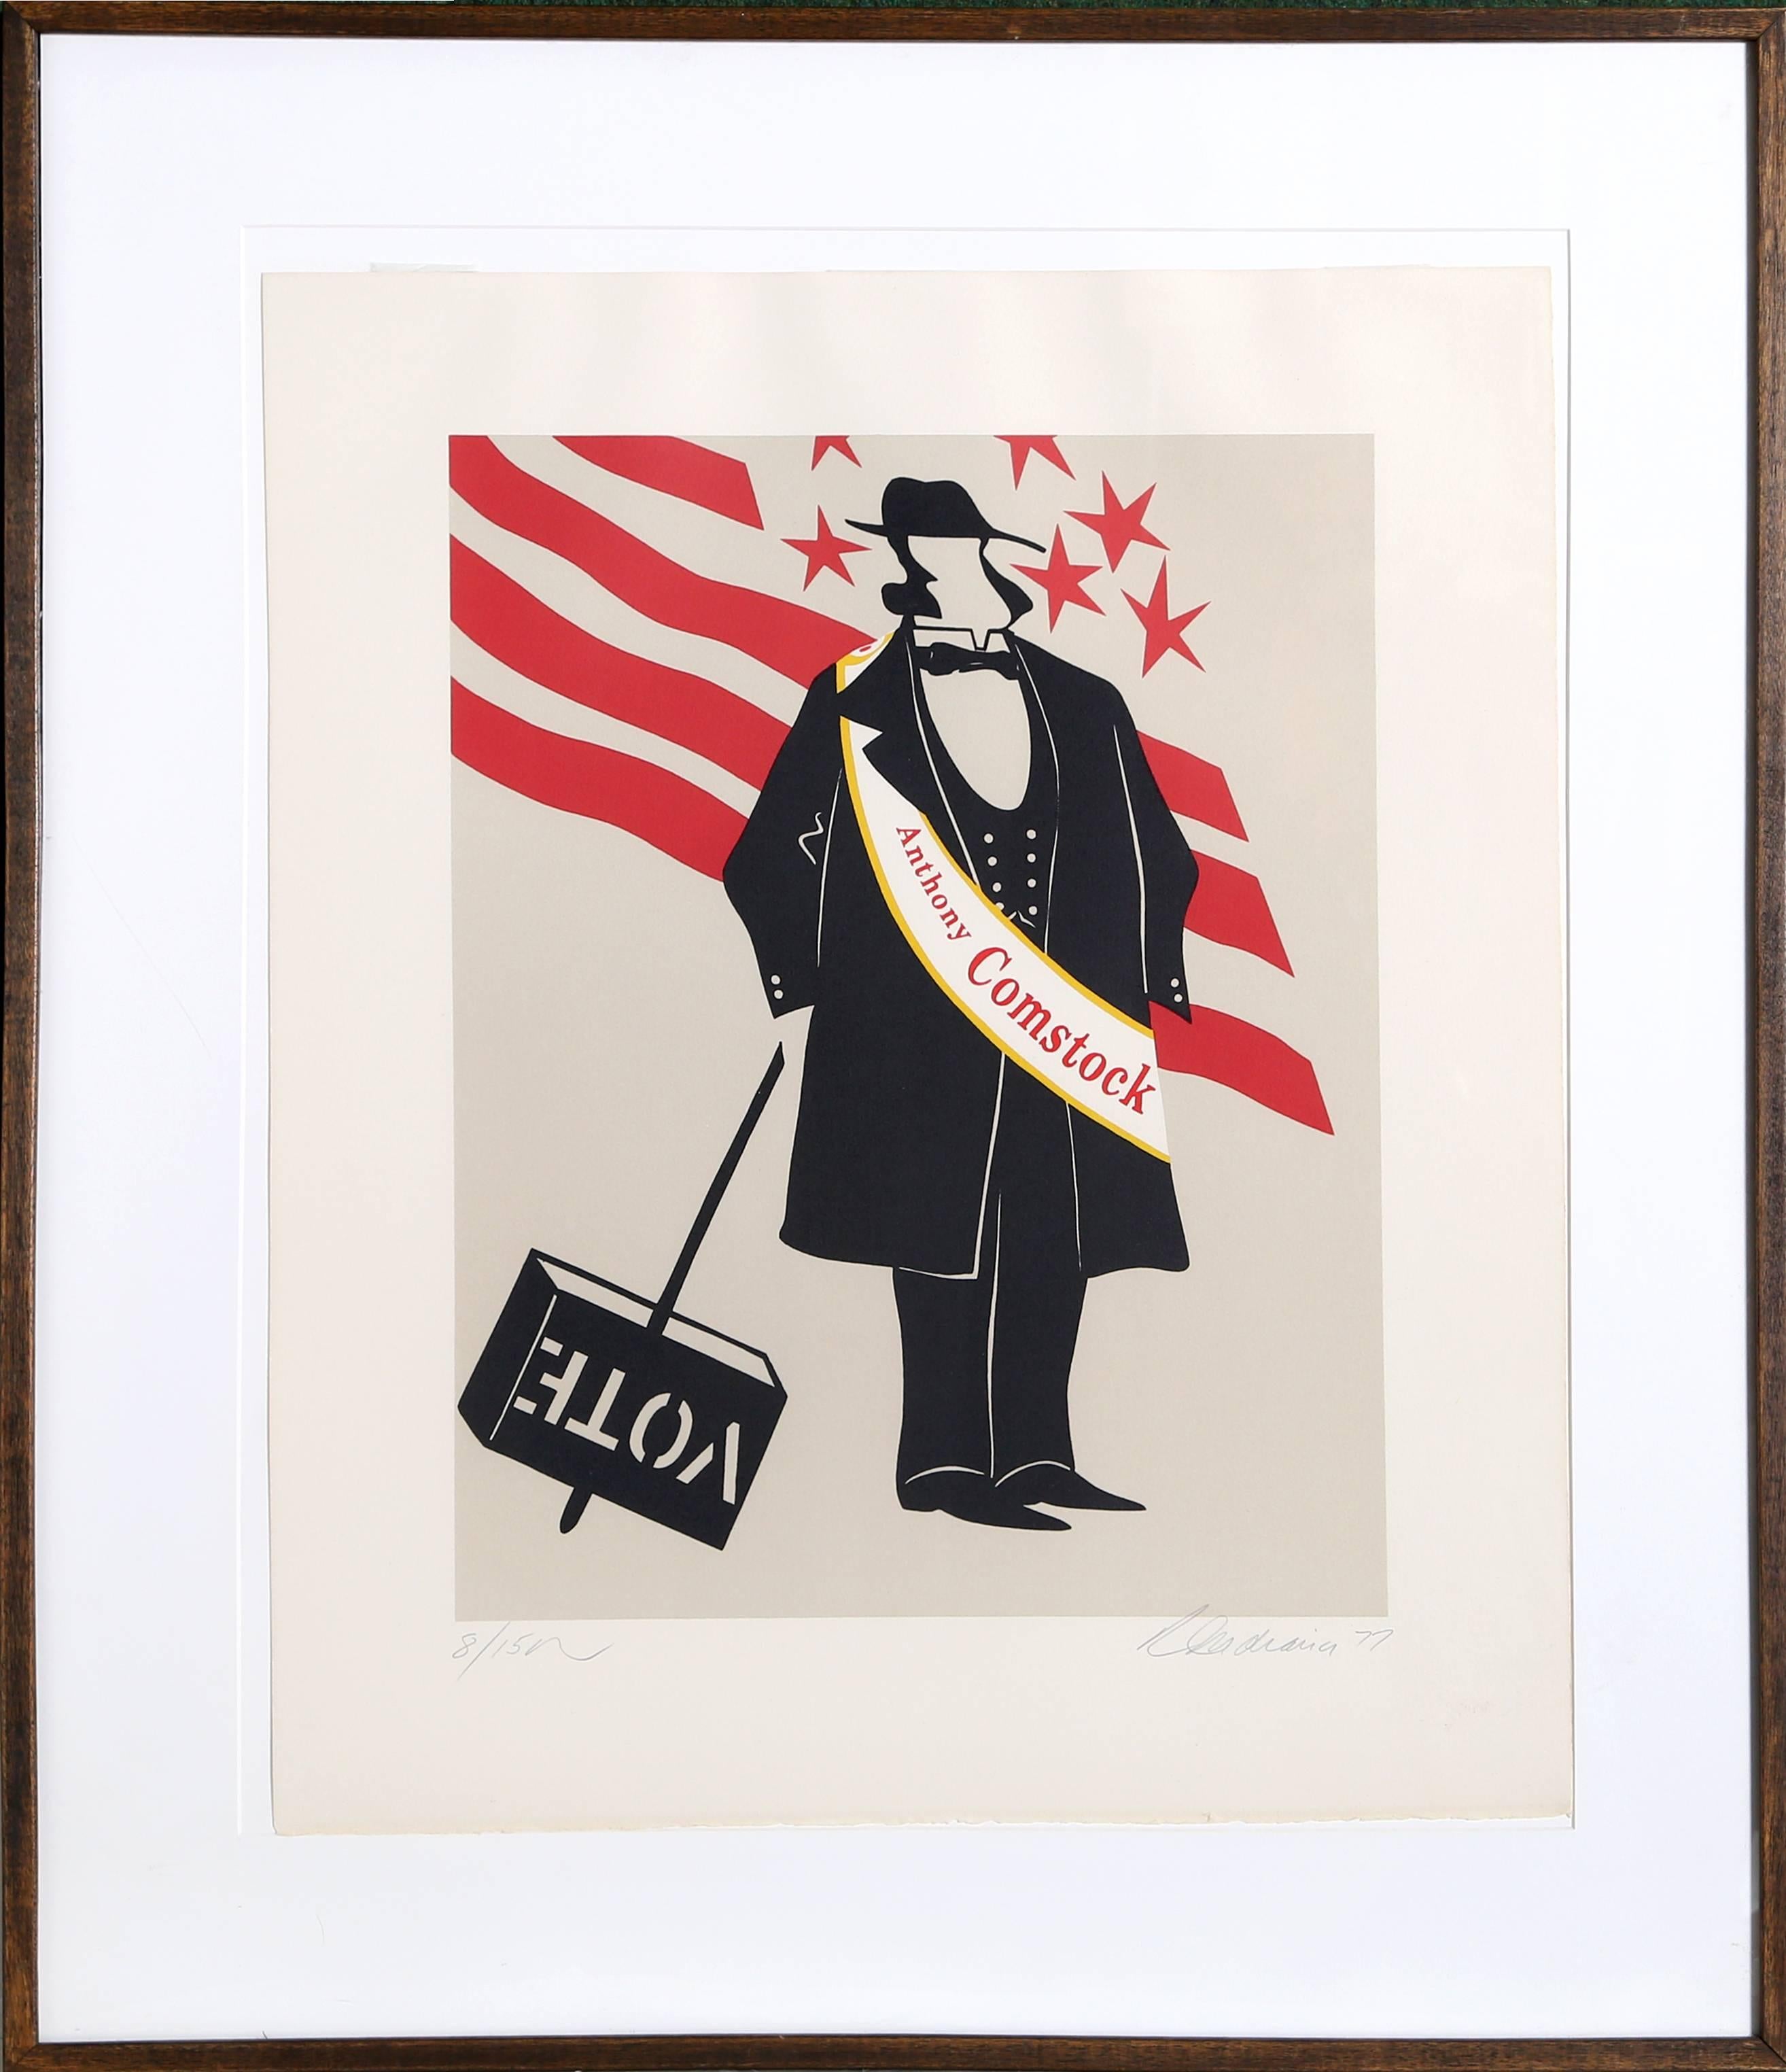 Artist: Robert Indiana, American (1928 - 2018)
Title: Gertrude Stein from Mother of Us All Series
Year: 1977
Medium: Lithograph on Arches, signed and numbered in pencil 
Edition: 150 
Paper Size: 24 x 20 inches 
Frame Size: 31.25 x 26.75